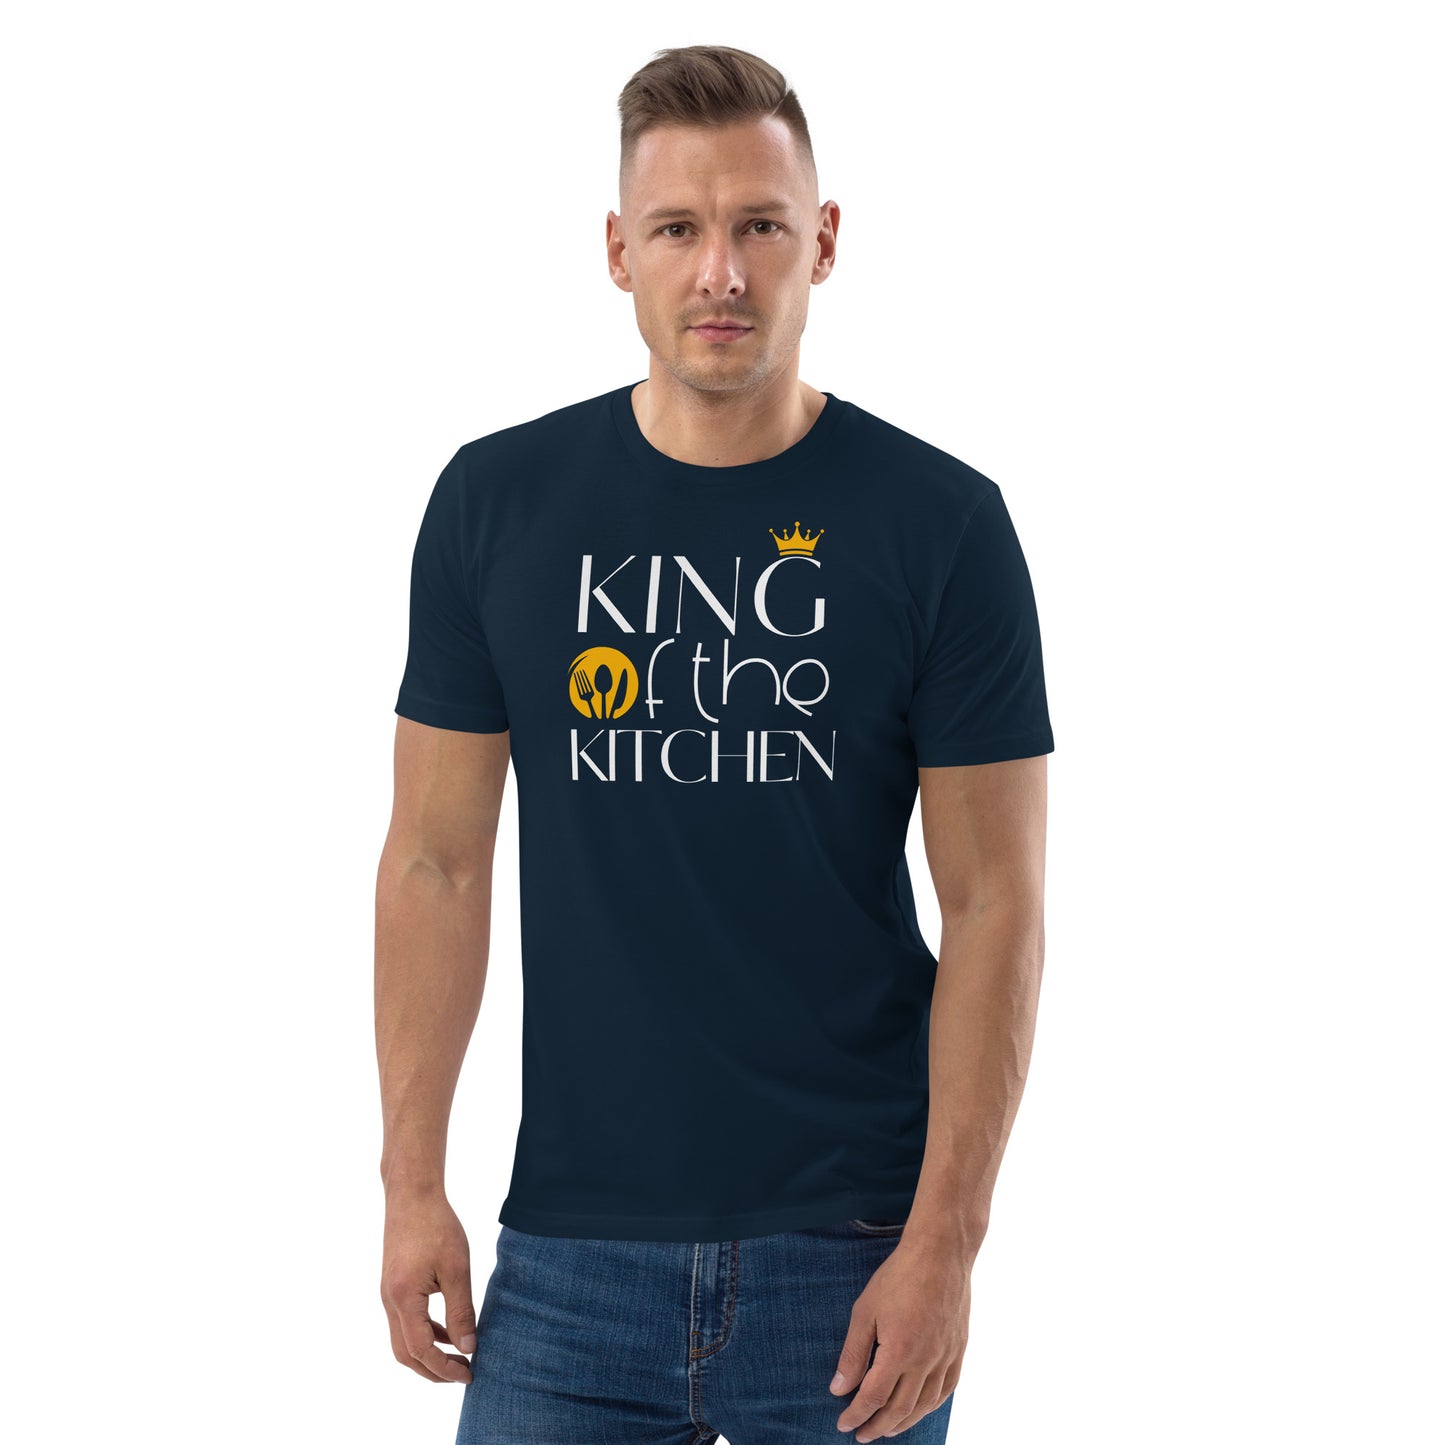 "King of the kitchen" custom made T-Shirt fpr Hobby Chefs, in navy